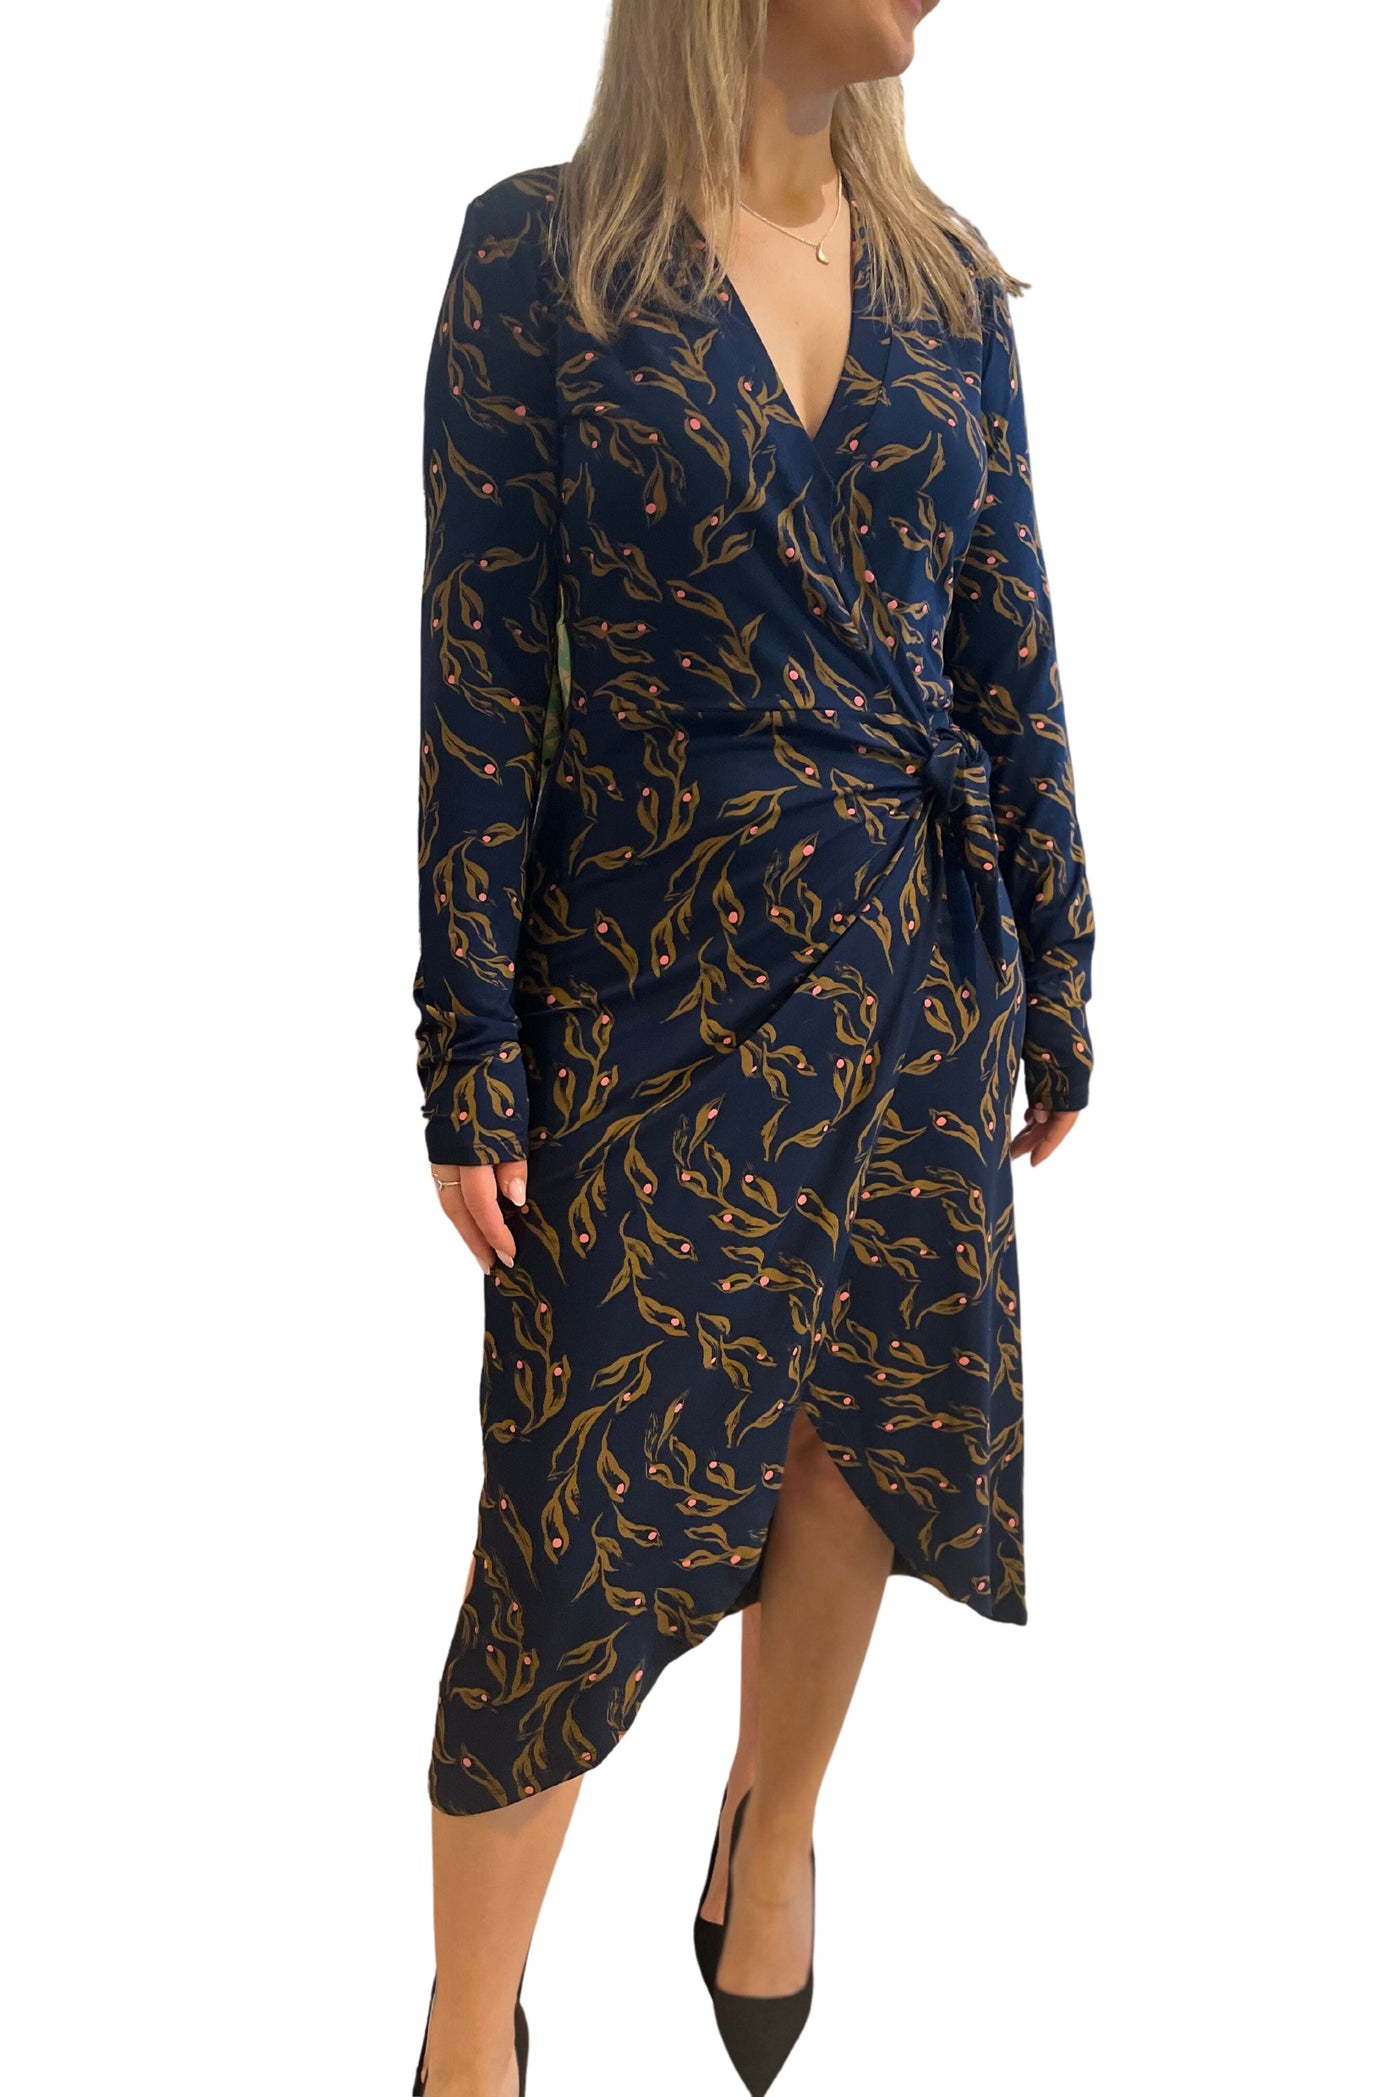 Zilch Dress Wrap in Leaves Navy-Womens-Ohh! By Gum - Shop Sustainable